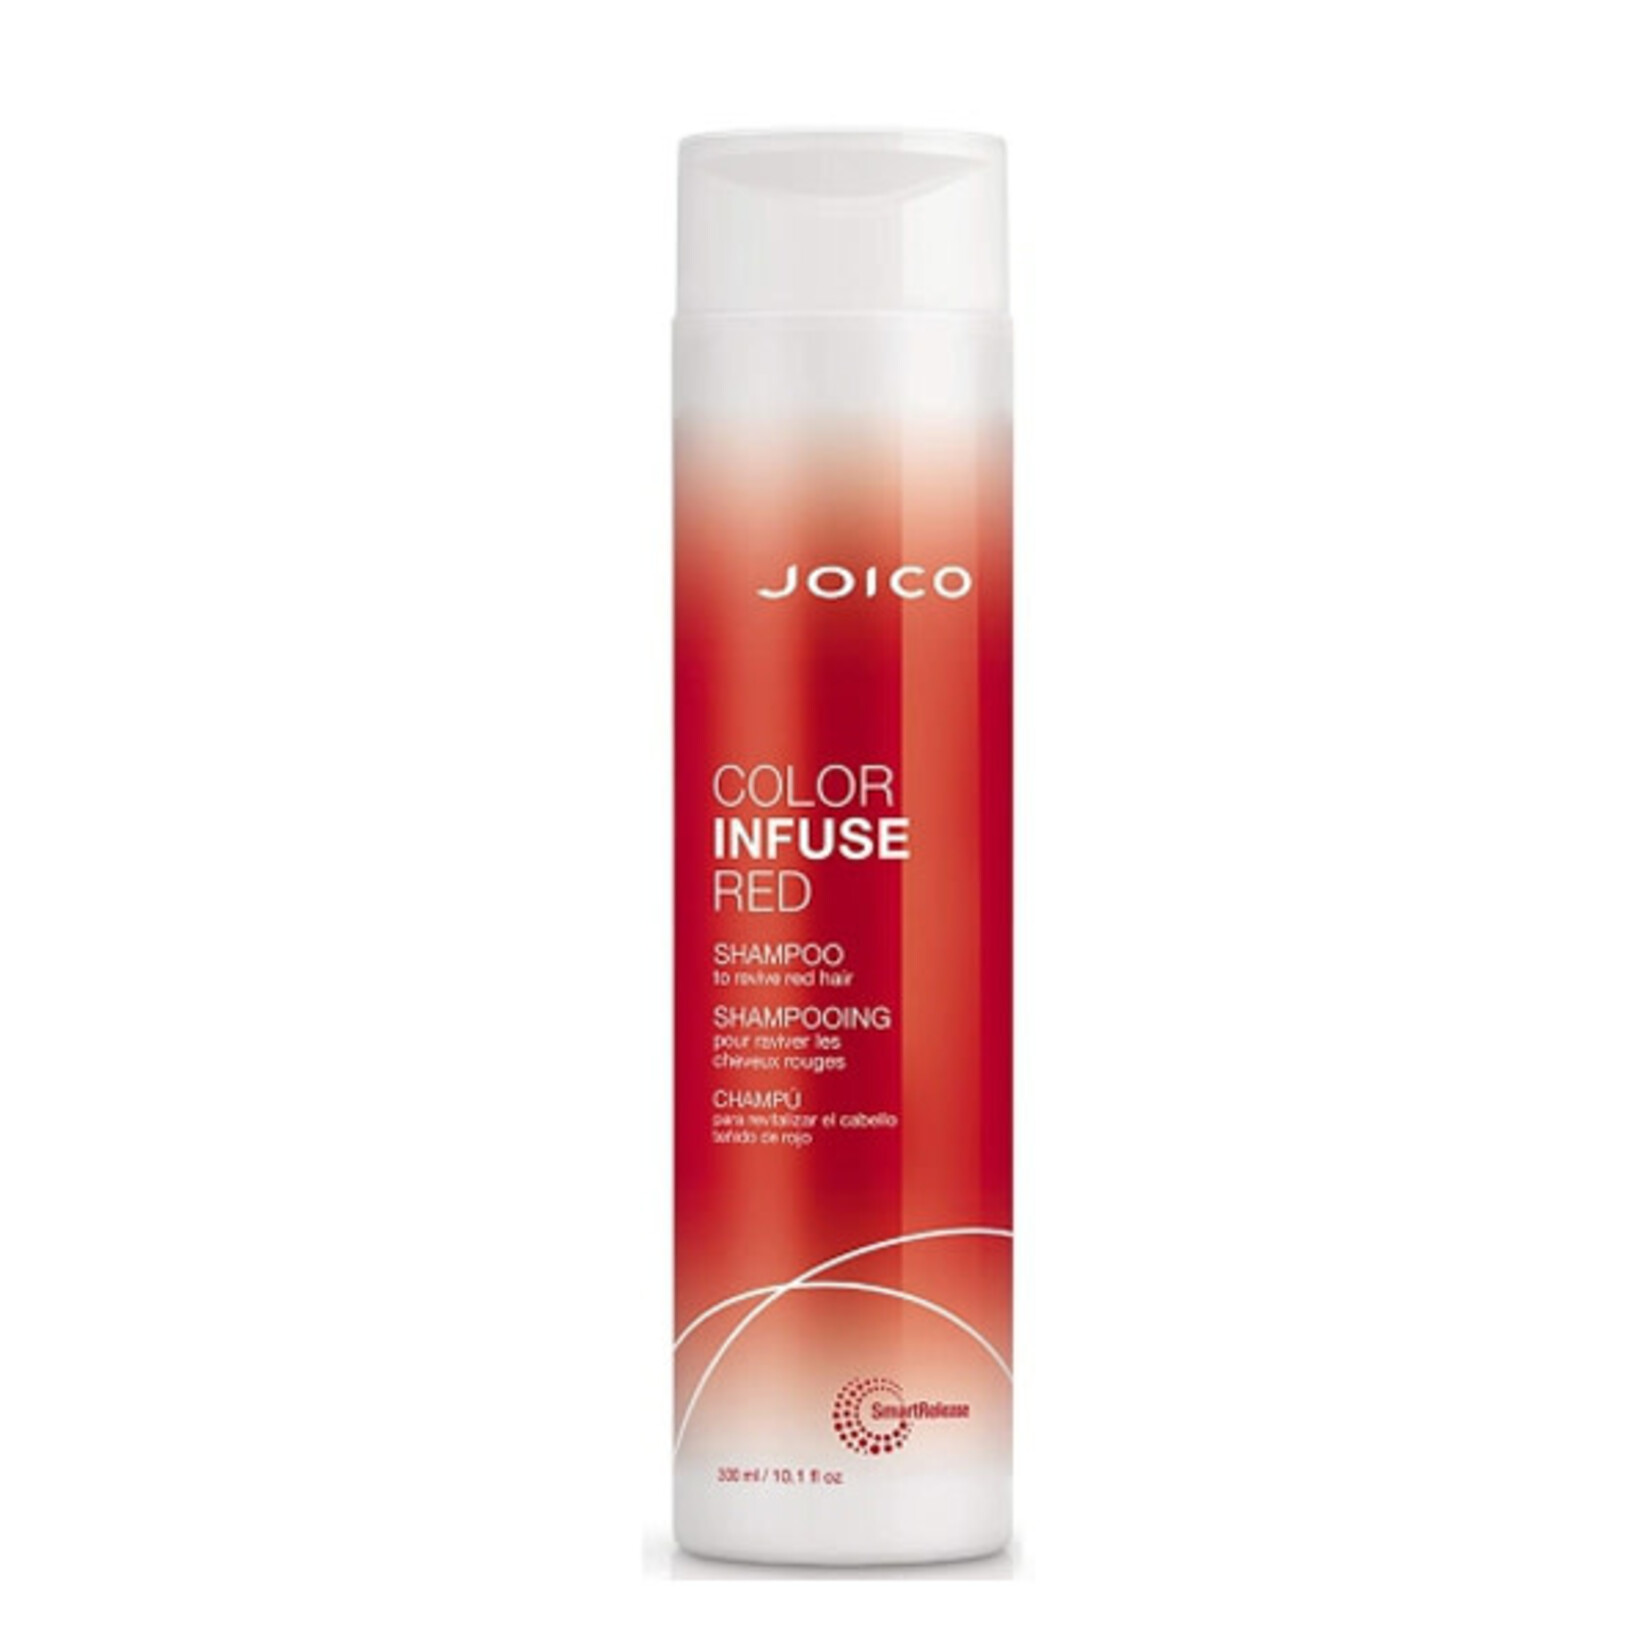 Joico Joico - Colore Infuse - Red Shampoo 300ml